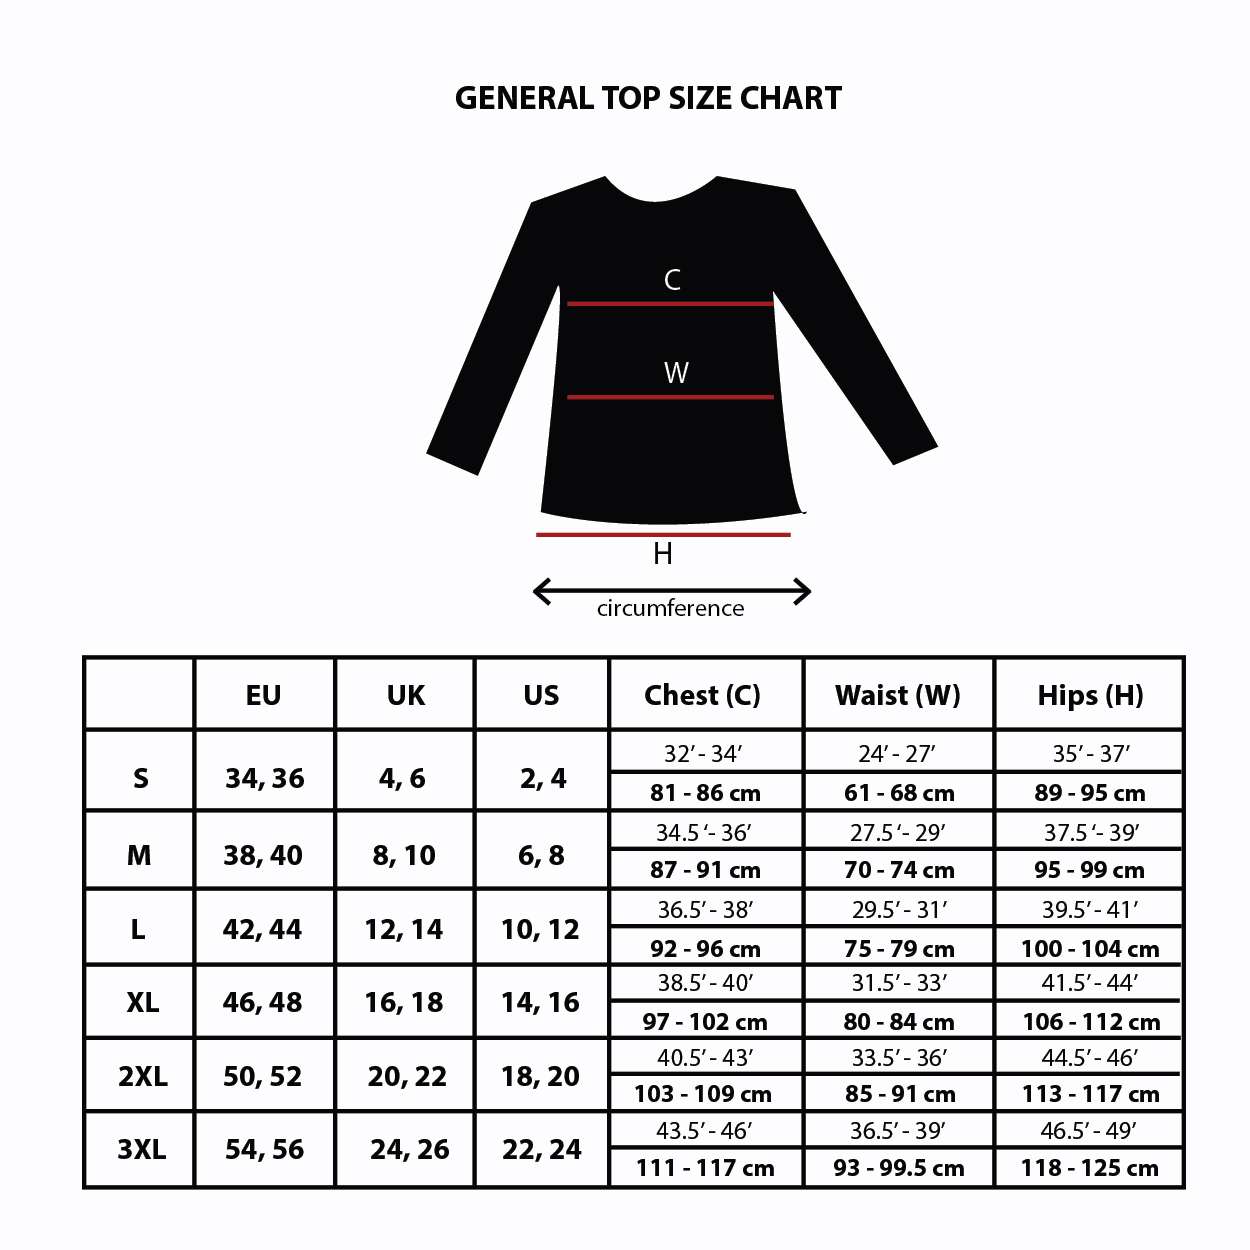 General Top Size Chart